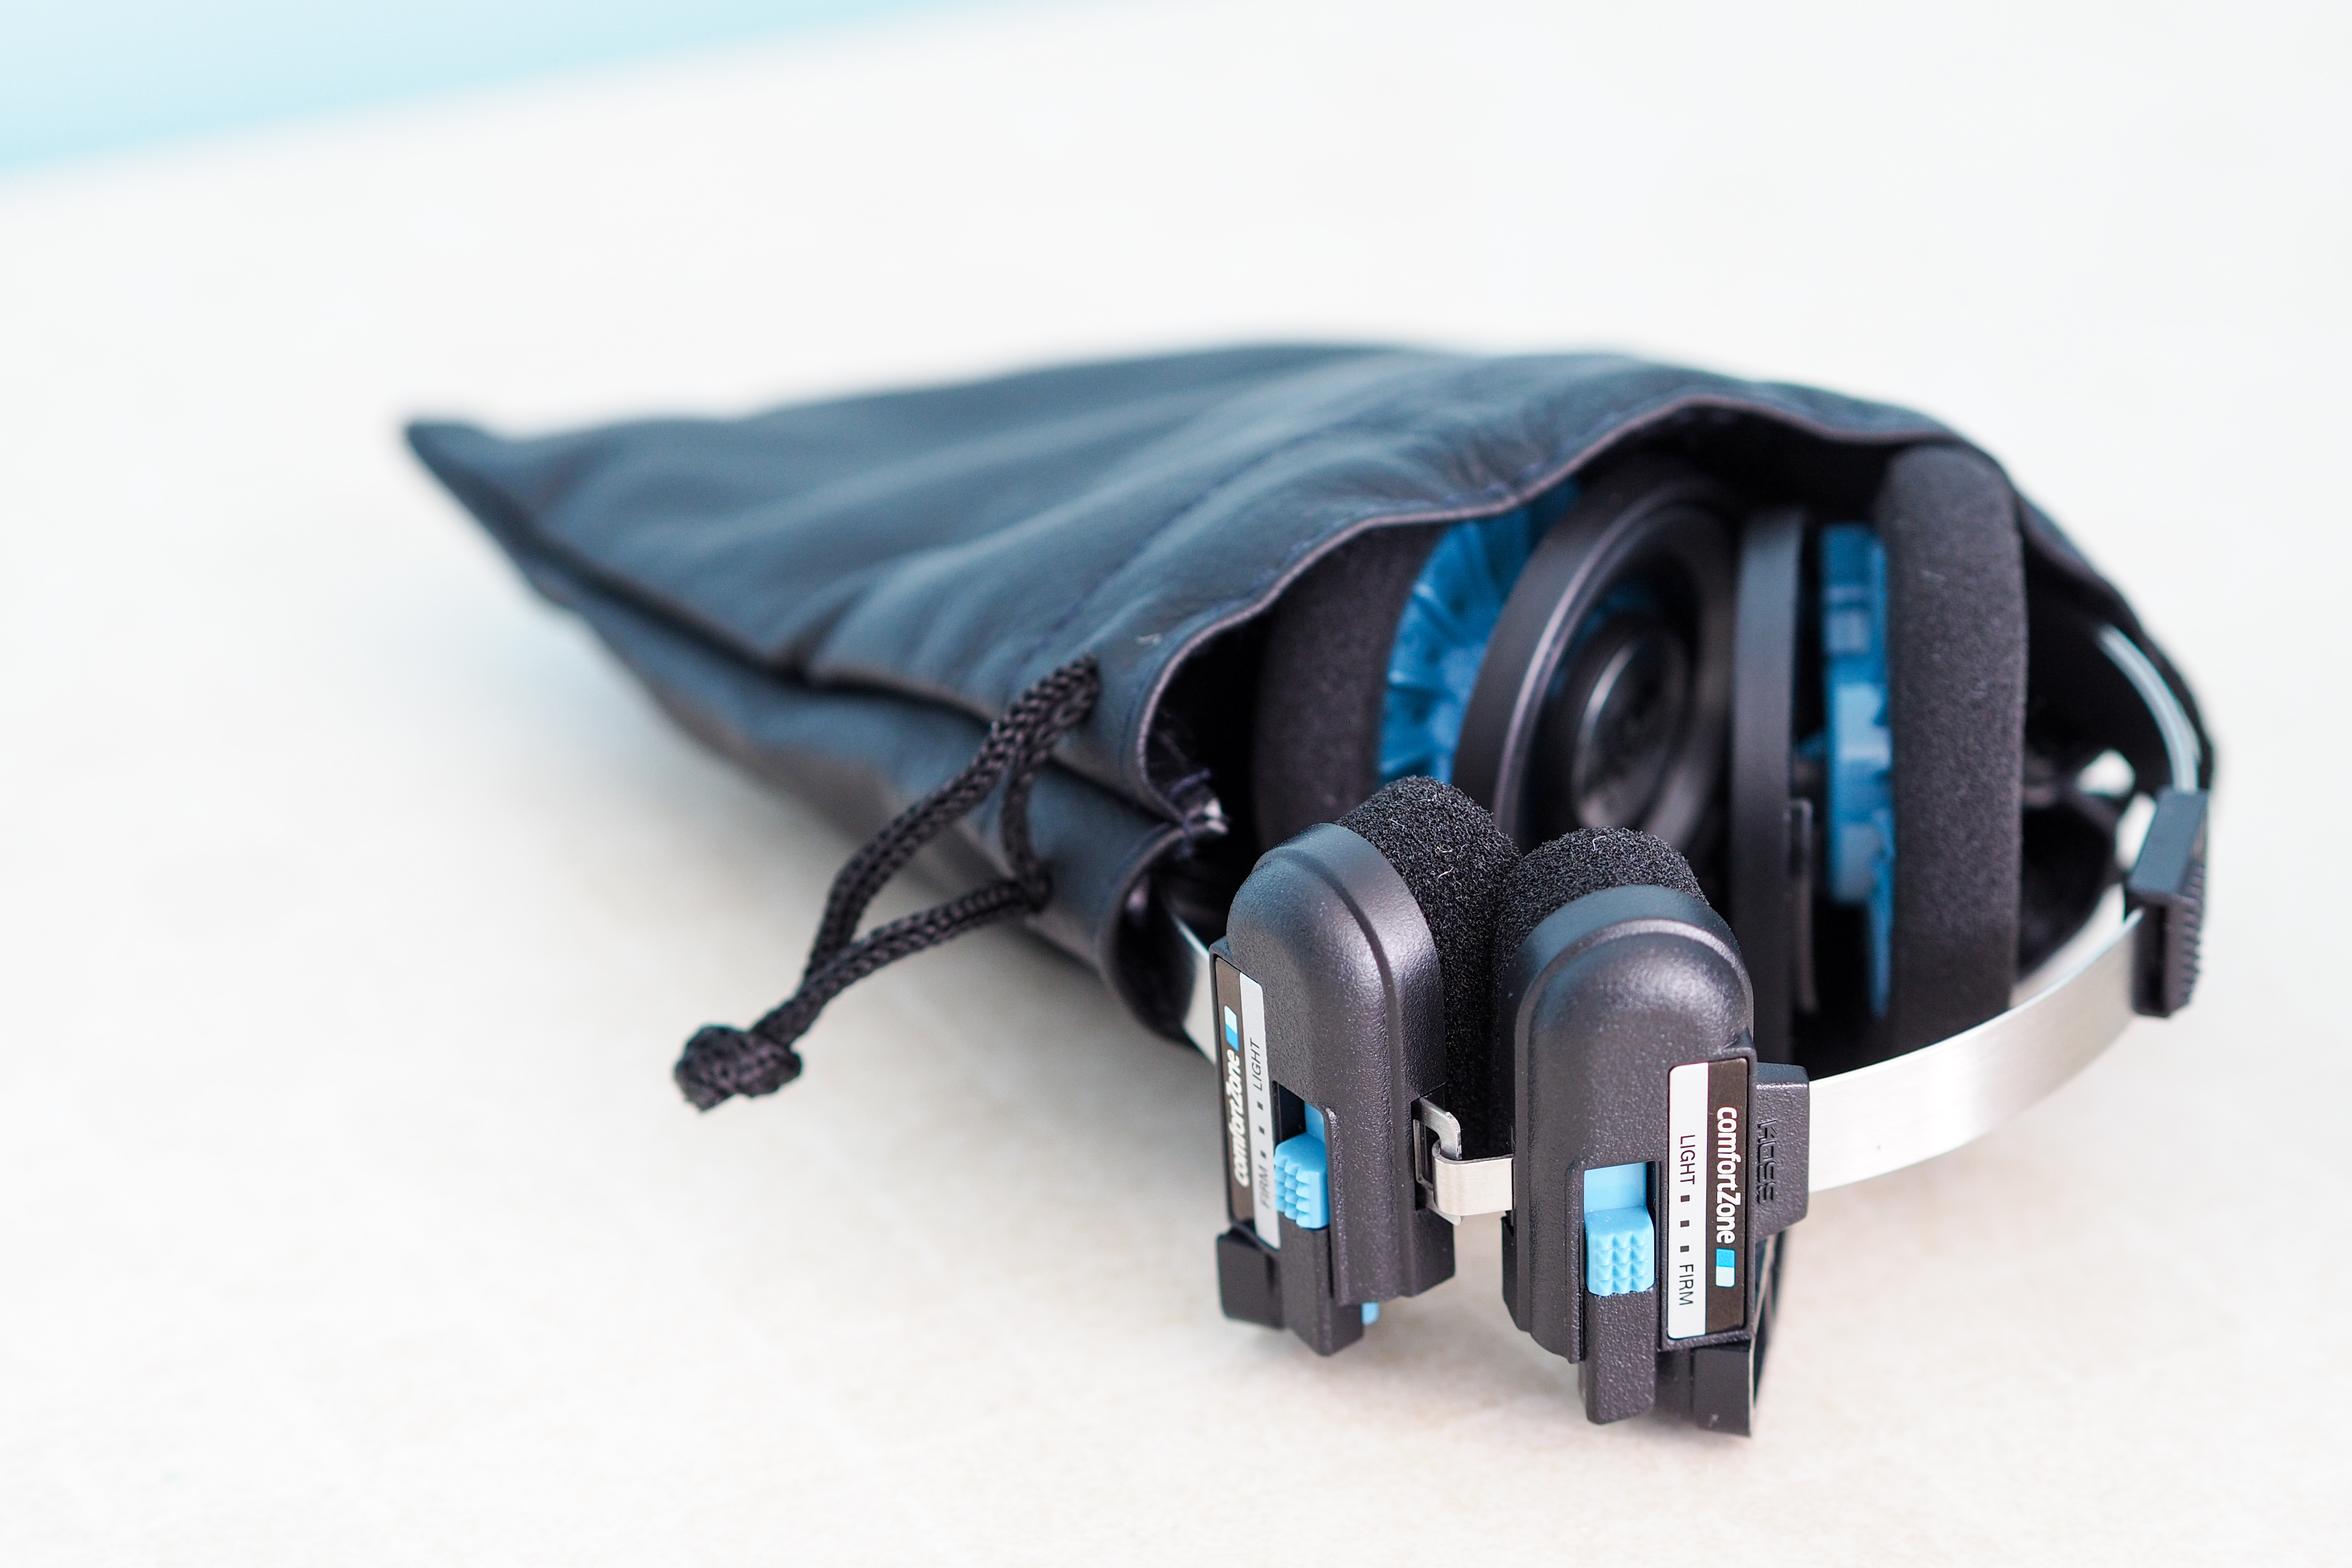 JLab Rewind Wireless Retro review: The Koss Porta Pro folded up and half out of the included drawsting bag.